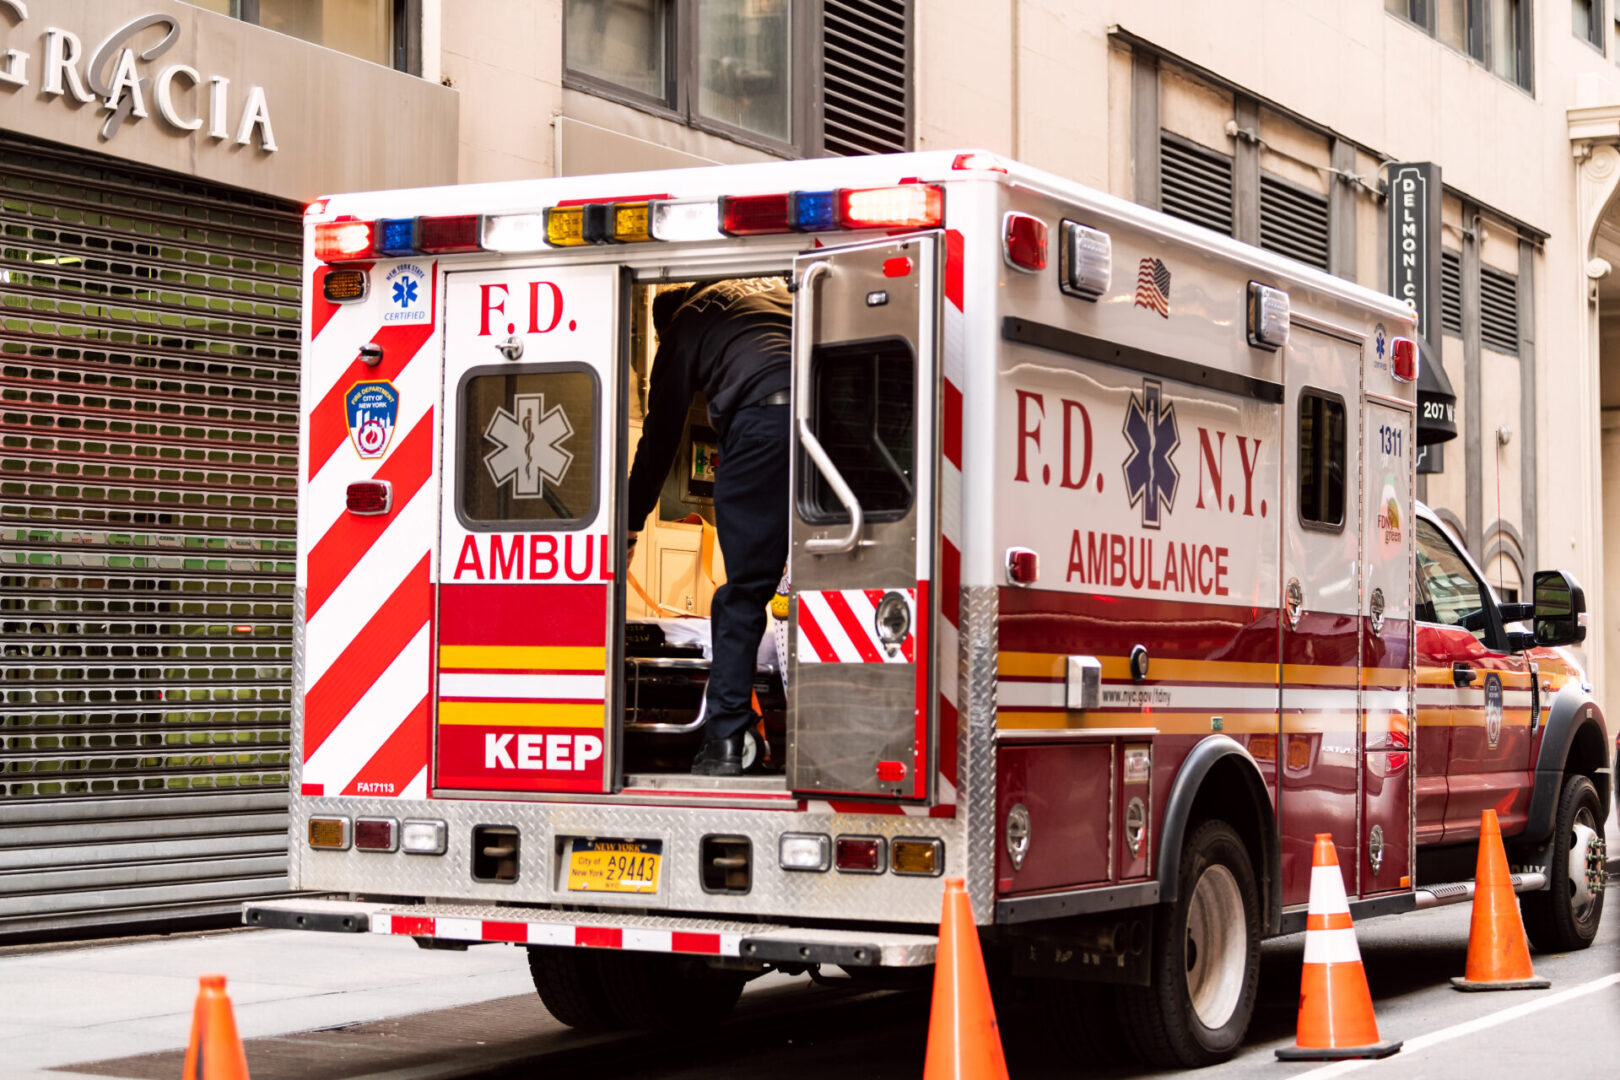 New York City - April 6, 2018: NYC midtown with FDNY red ambulance open truck parked on street